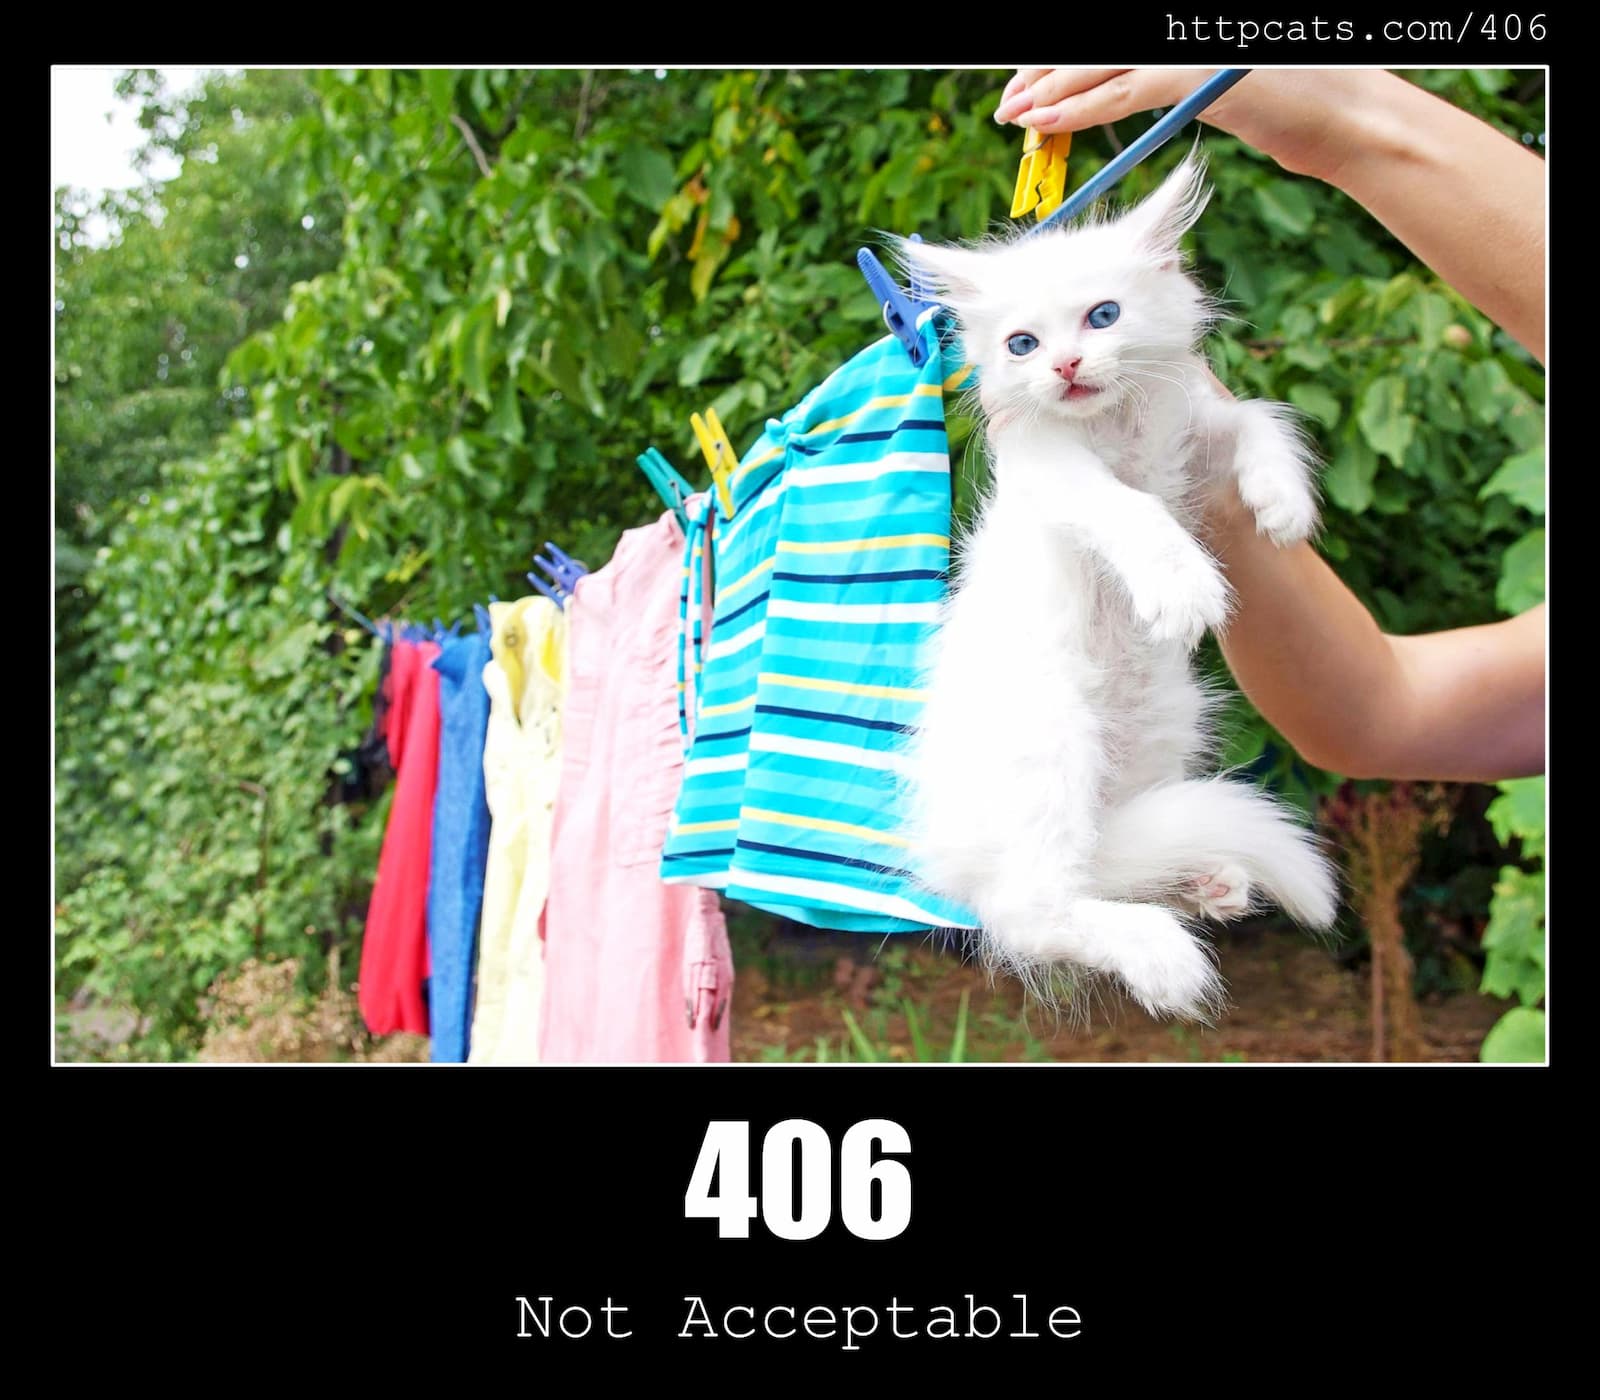 HTTP Status Code 406 Not Acceptable & Cats